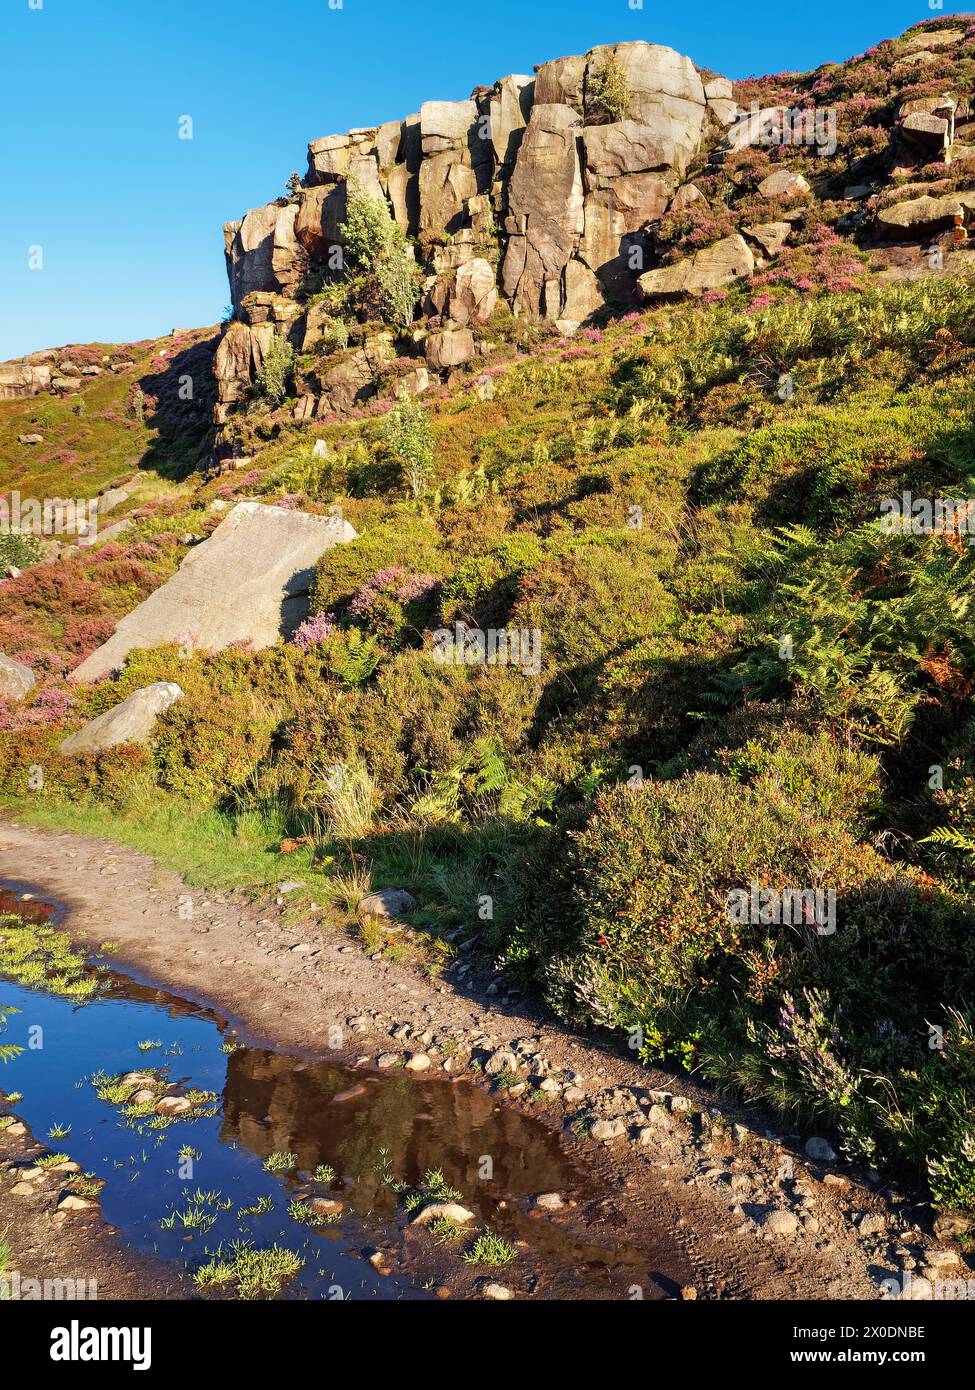 UK, West Yorkshire, Ilkley, Ilkley Moor, Footpath through Rocky Valley and Ilkley Crags. Stock Photo